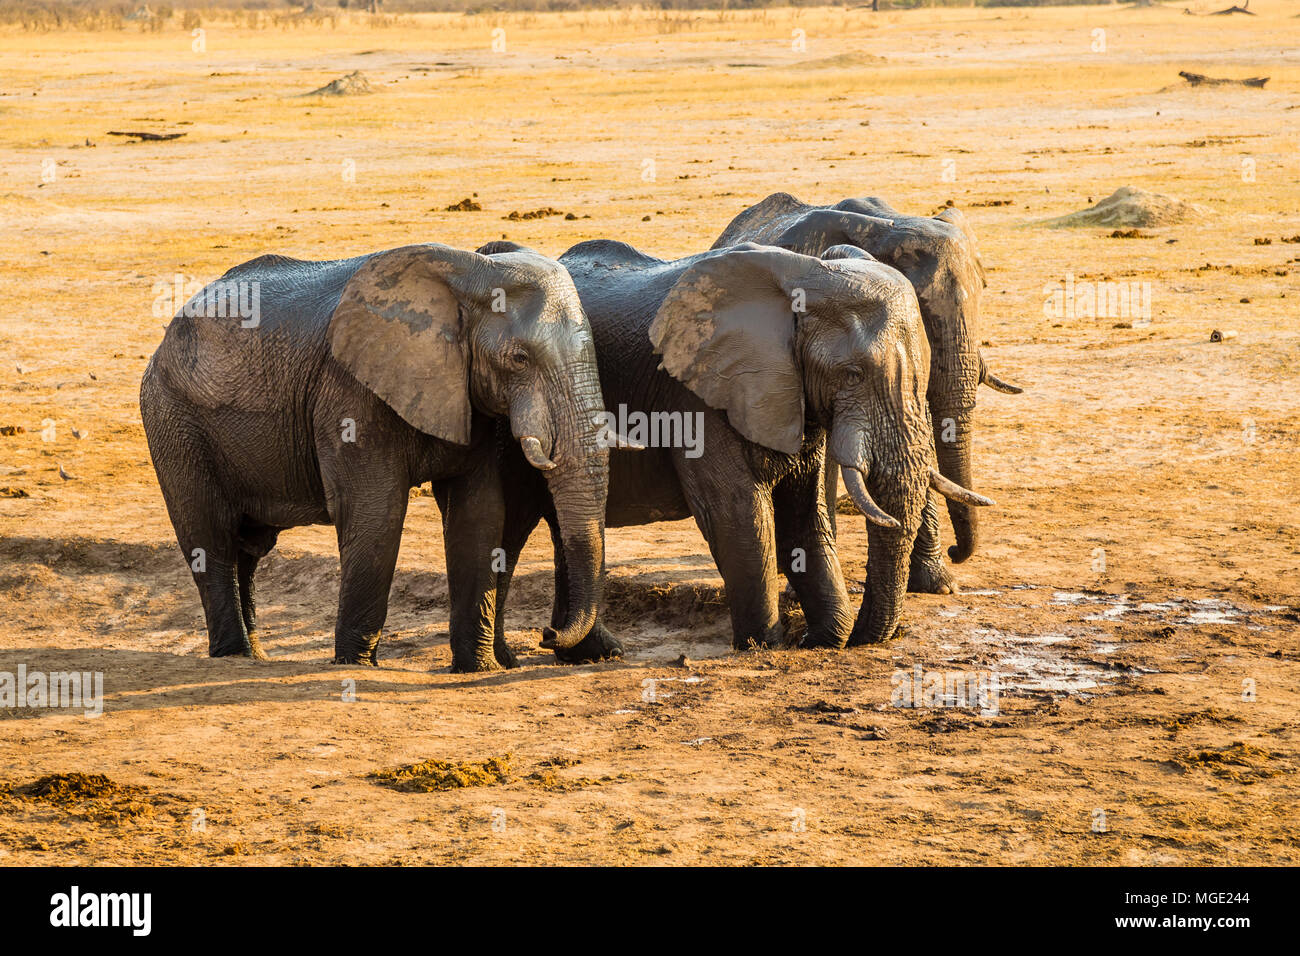 Elephants drinking the last of the water in a dried out waterhole, before the rains in Hwange Natinal Park, Zimbabwe. september 9, 2016. Stock Photo